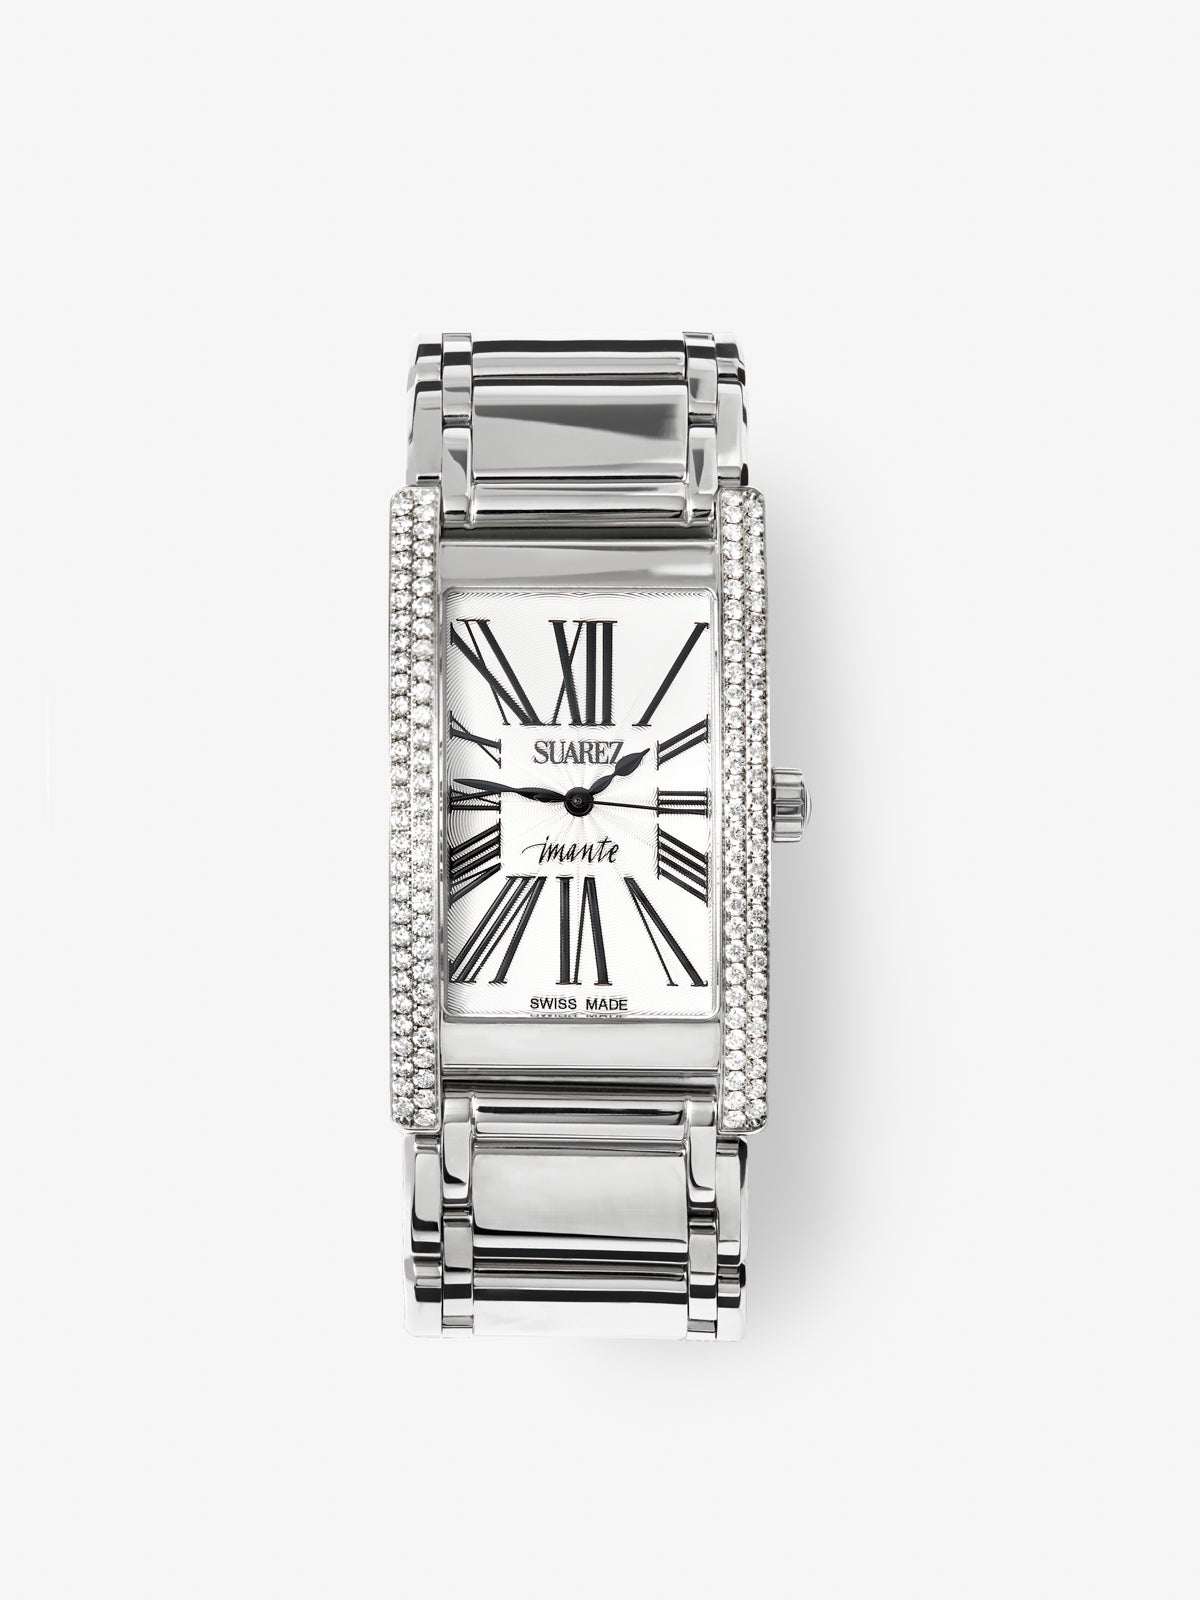 Stainless steel watch with white diamonds in bright size, sapphire glass and quartz movement